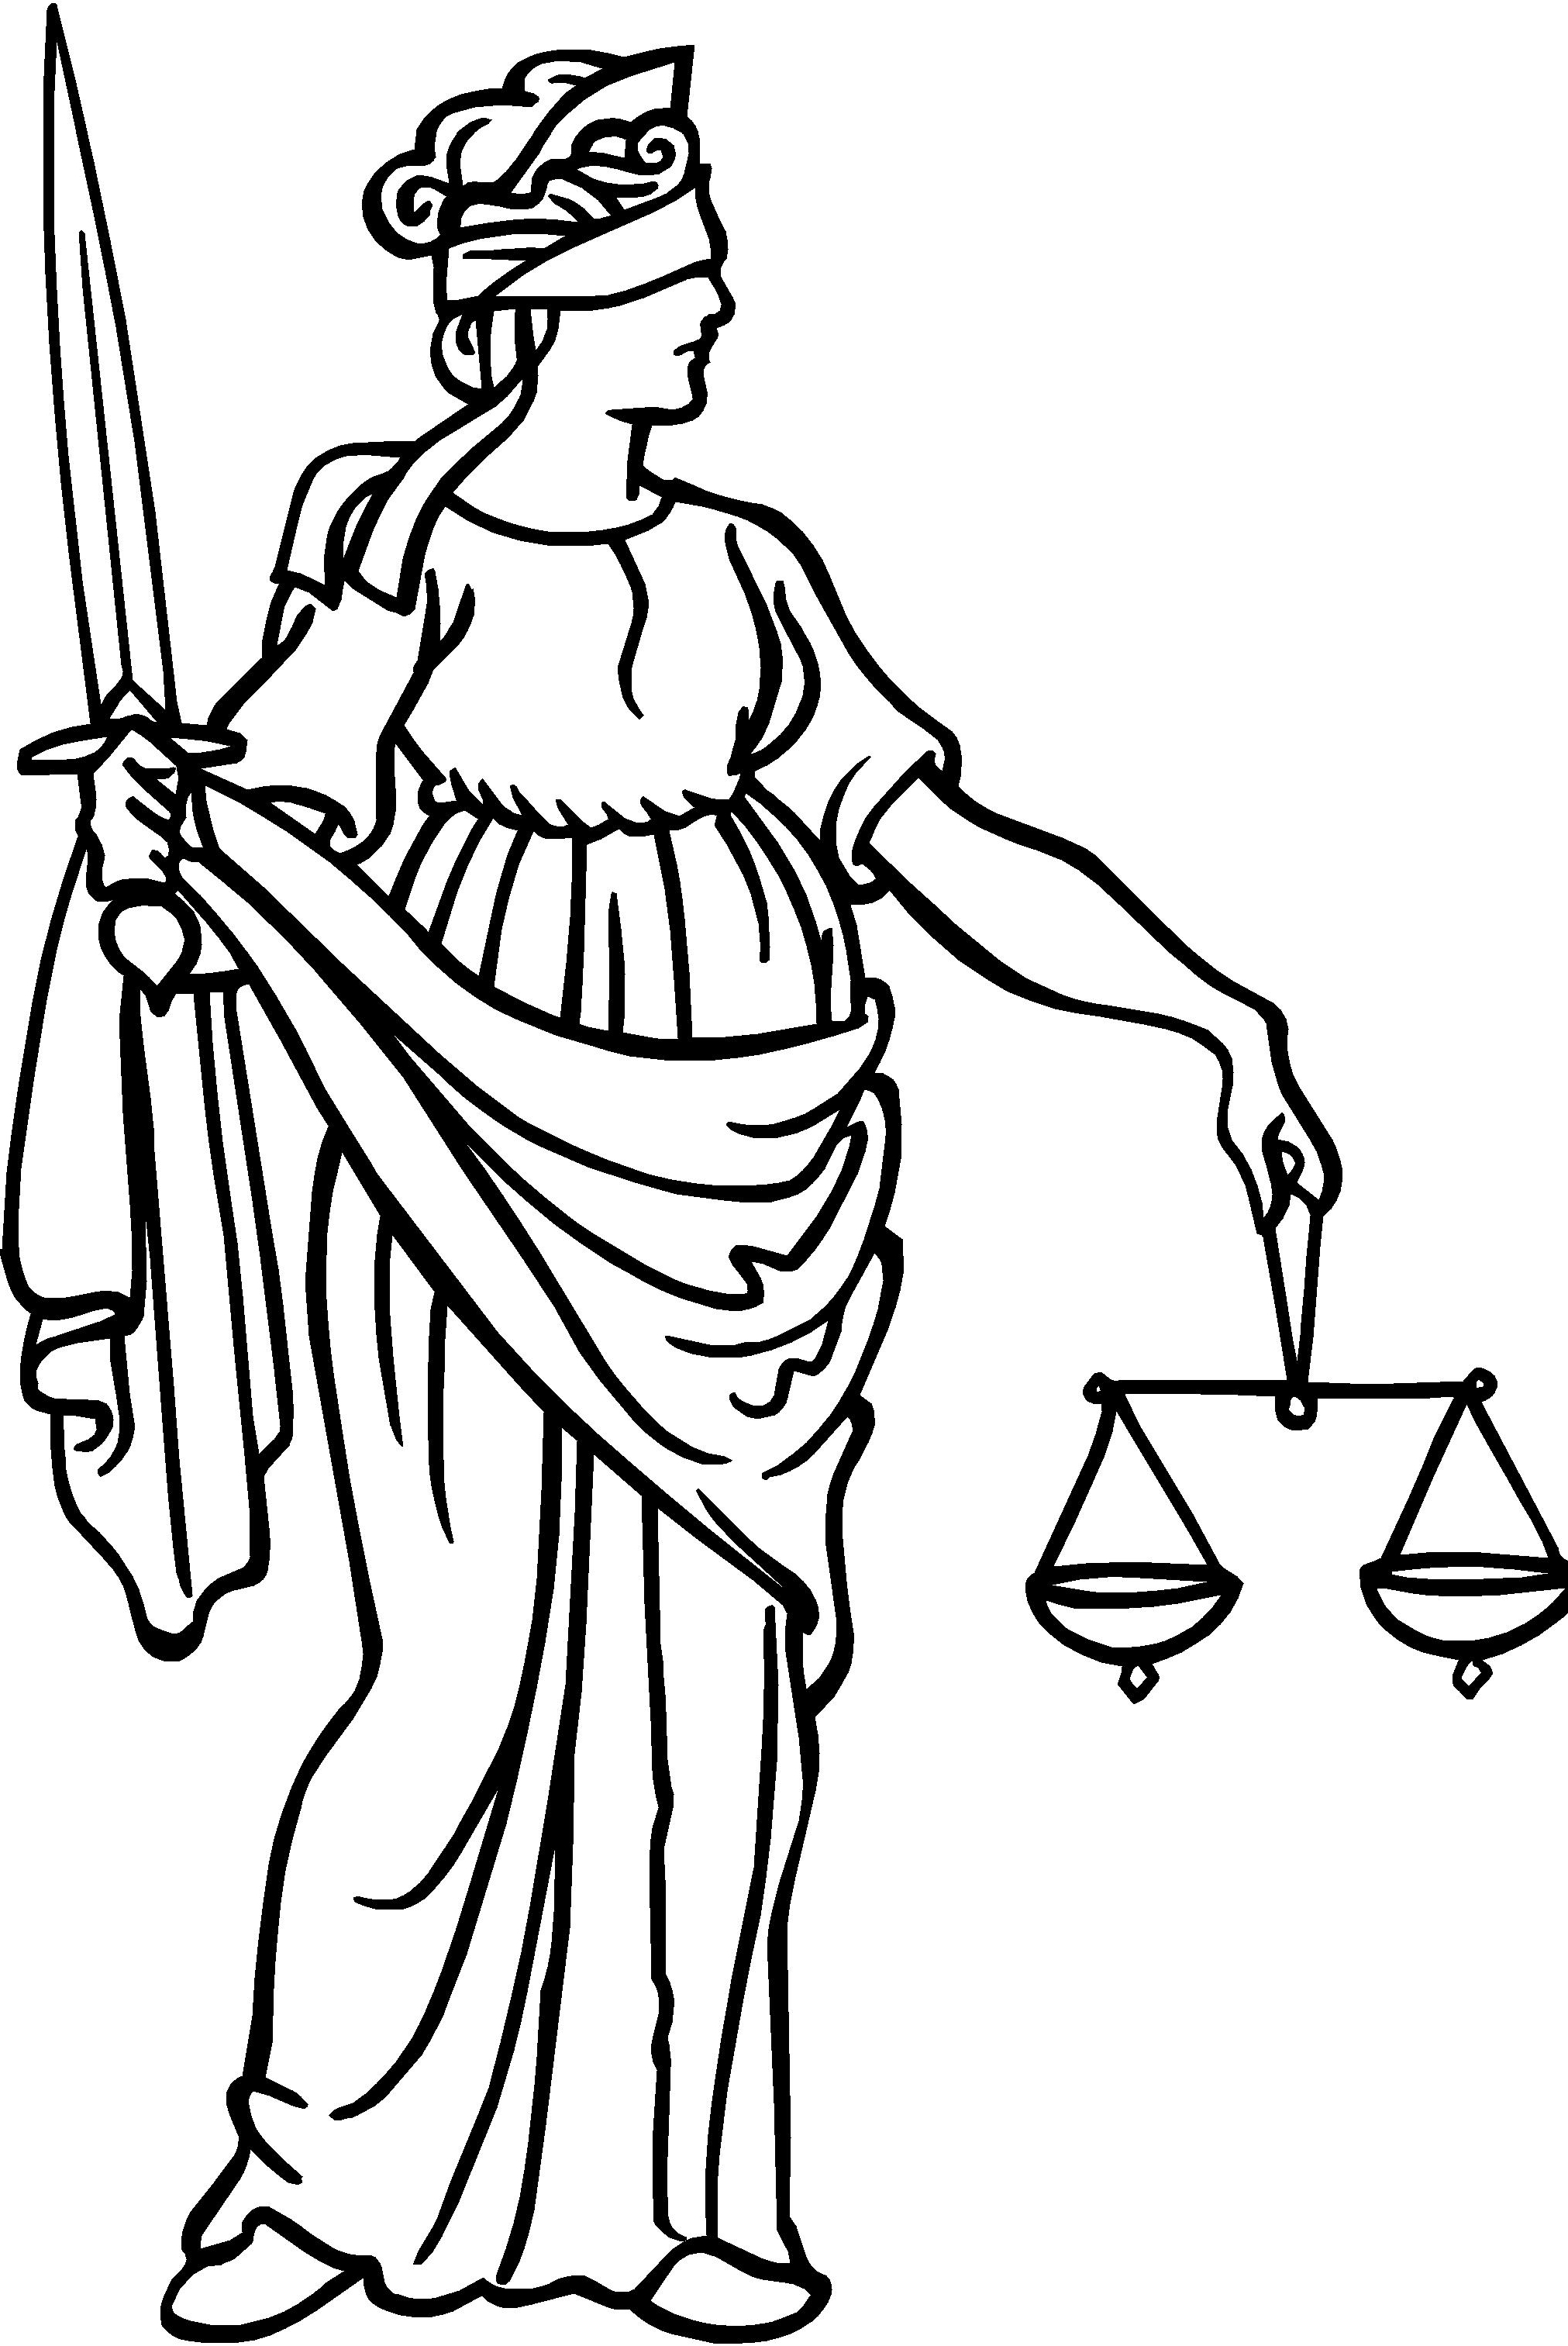 Statue Of Blind Justice - ClipArt Best